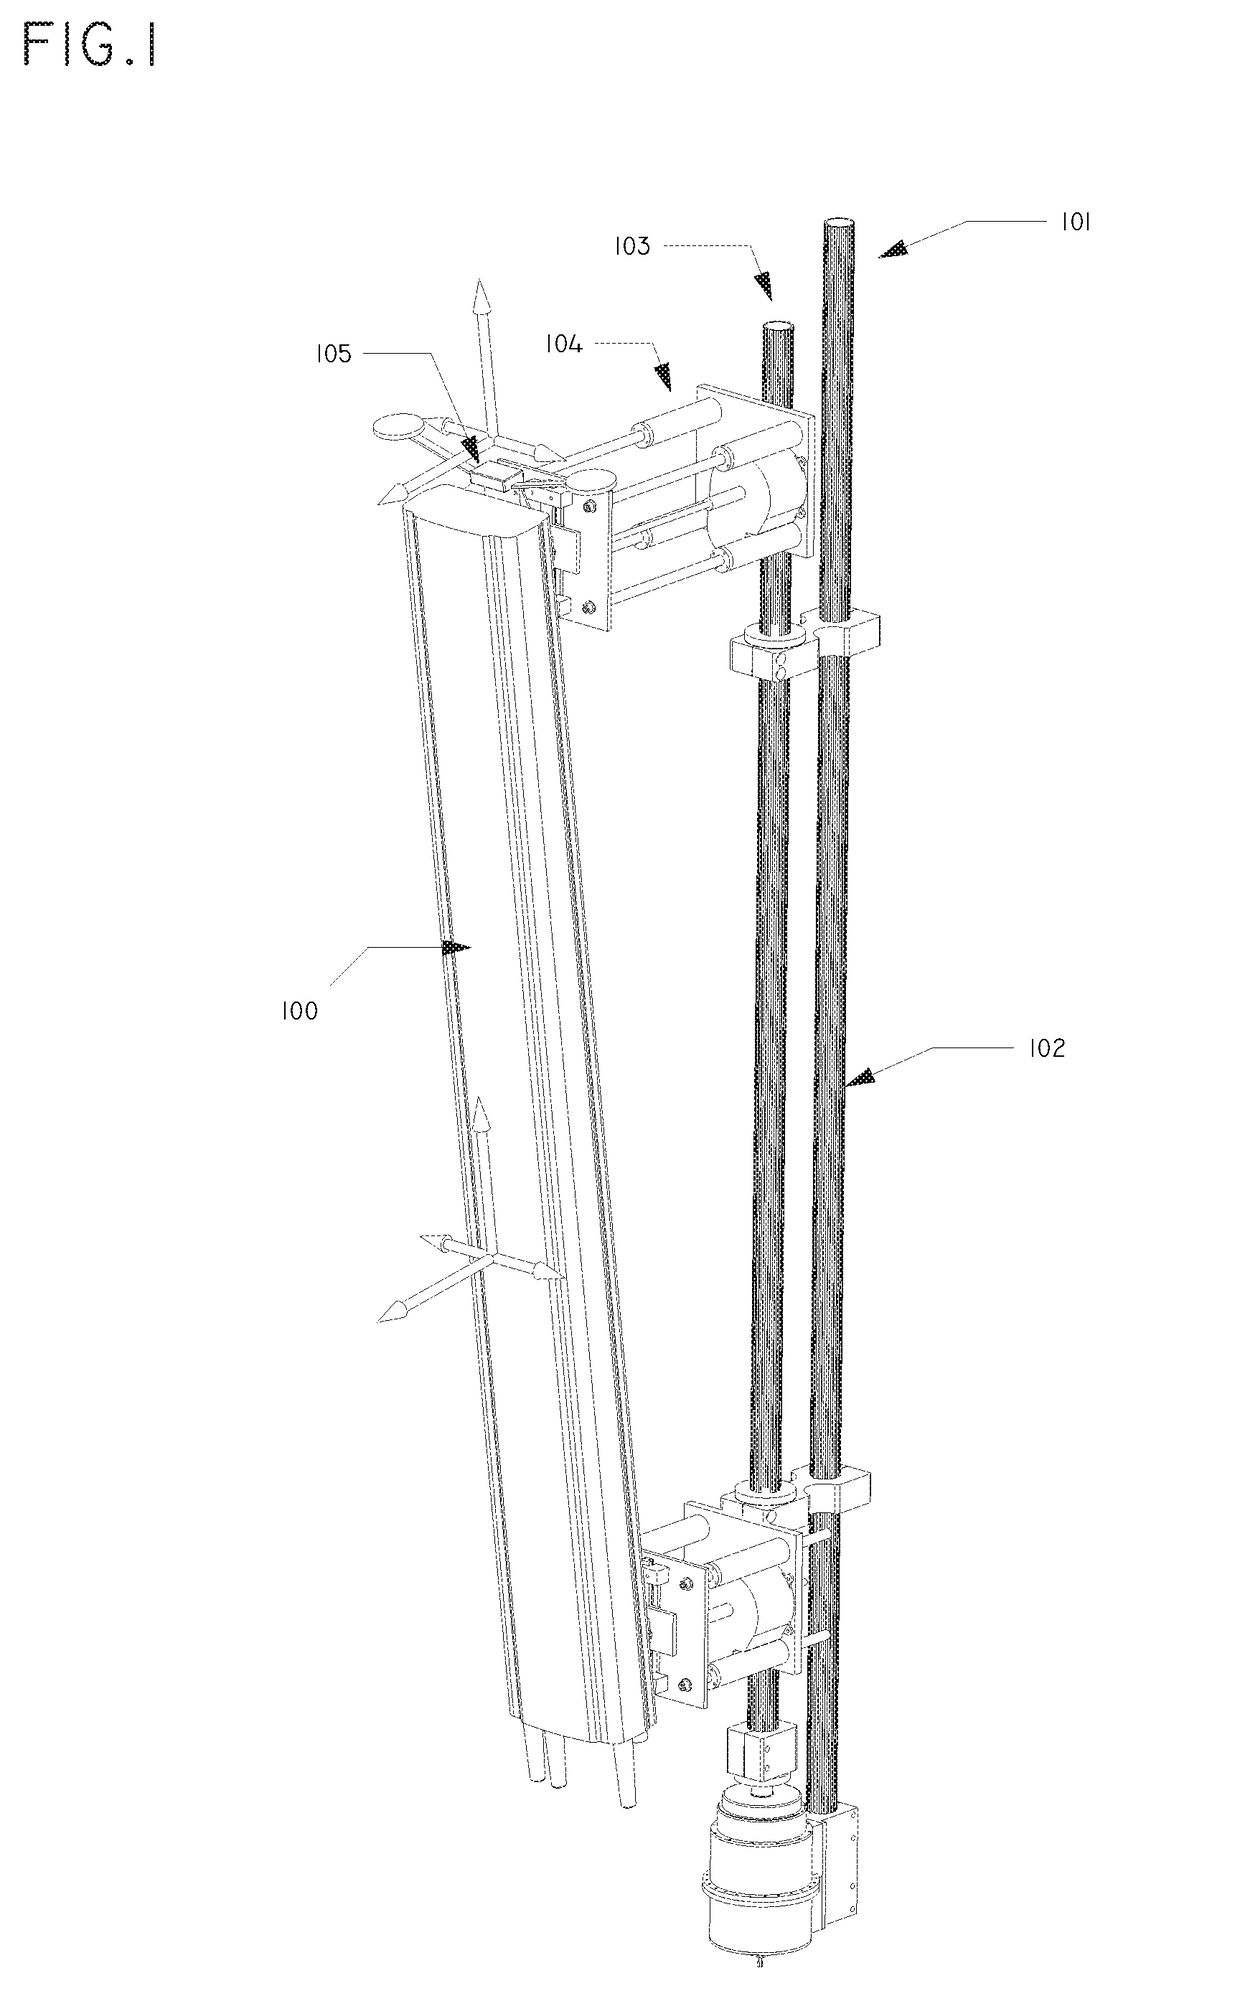 Two-way antenna mounting bracket and assembly with independently adjustable electromechanical antenna tilt and azimuthal steering for beam reshaping